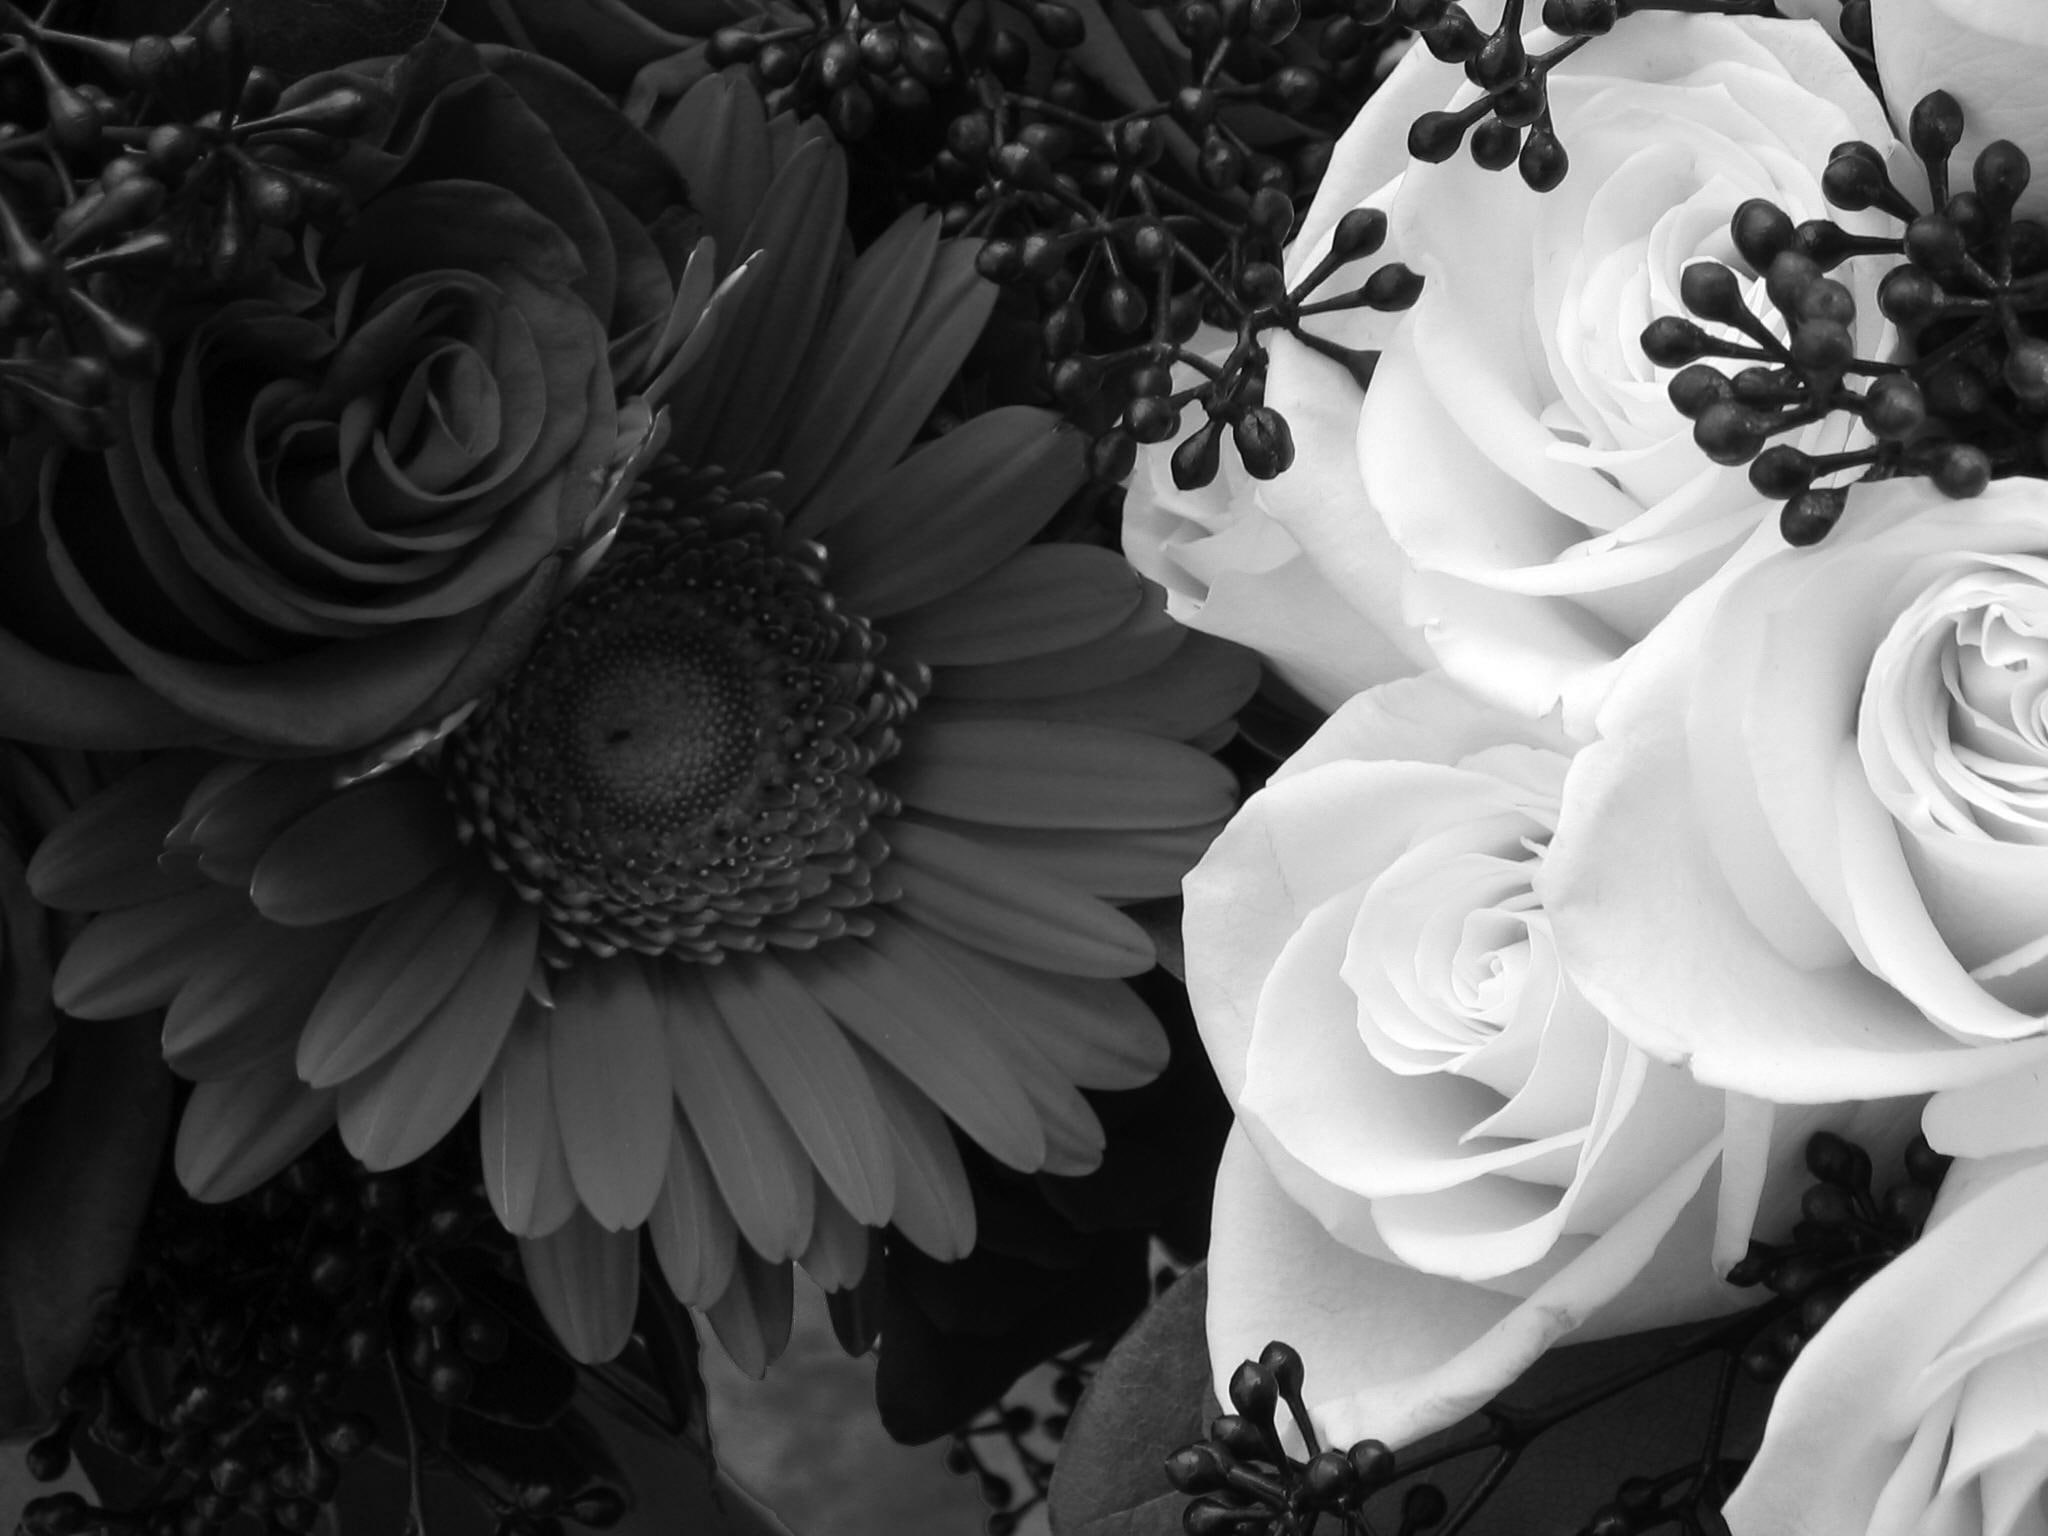 Free Download Hd Wallpaper Blackandwithe Roses Withe Roses Wall Flowers Daisy 3d And 